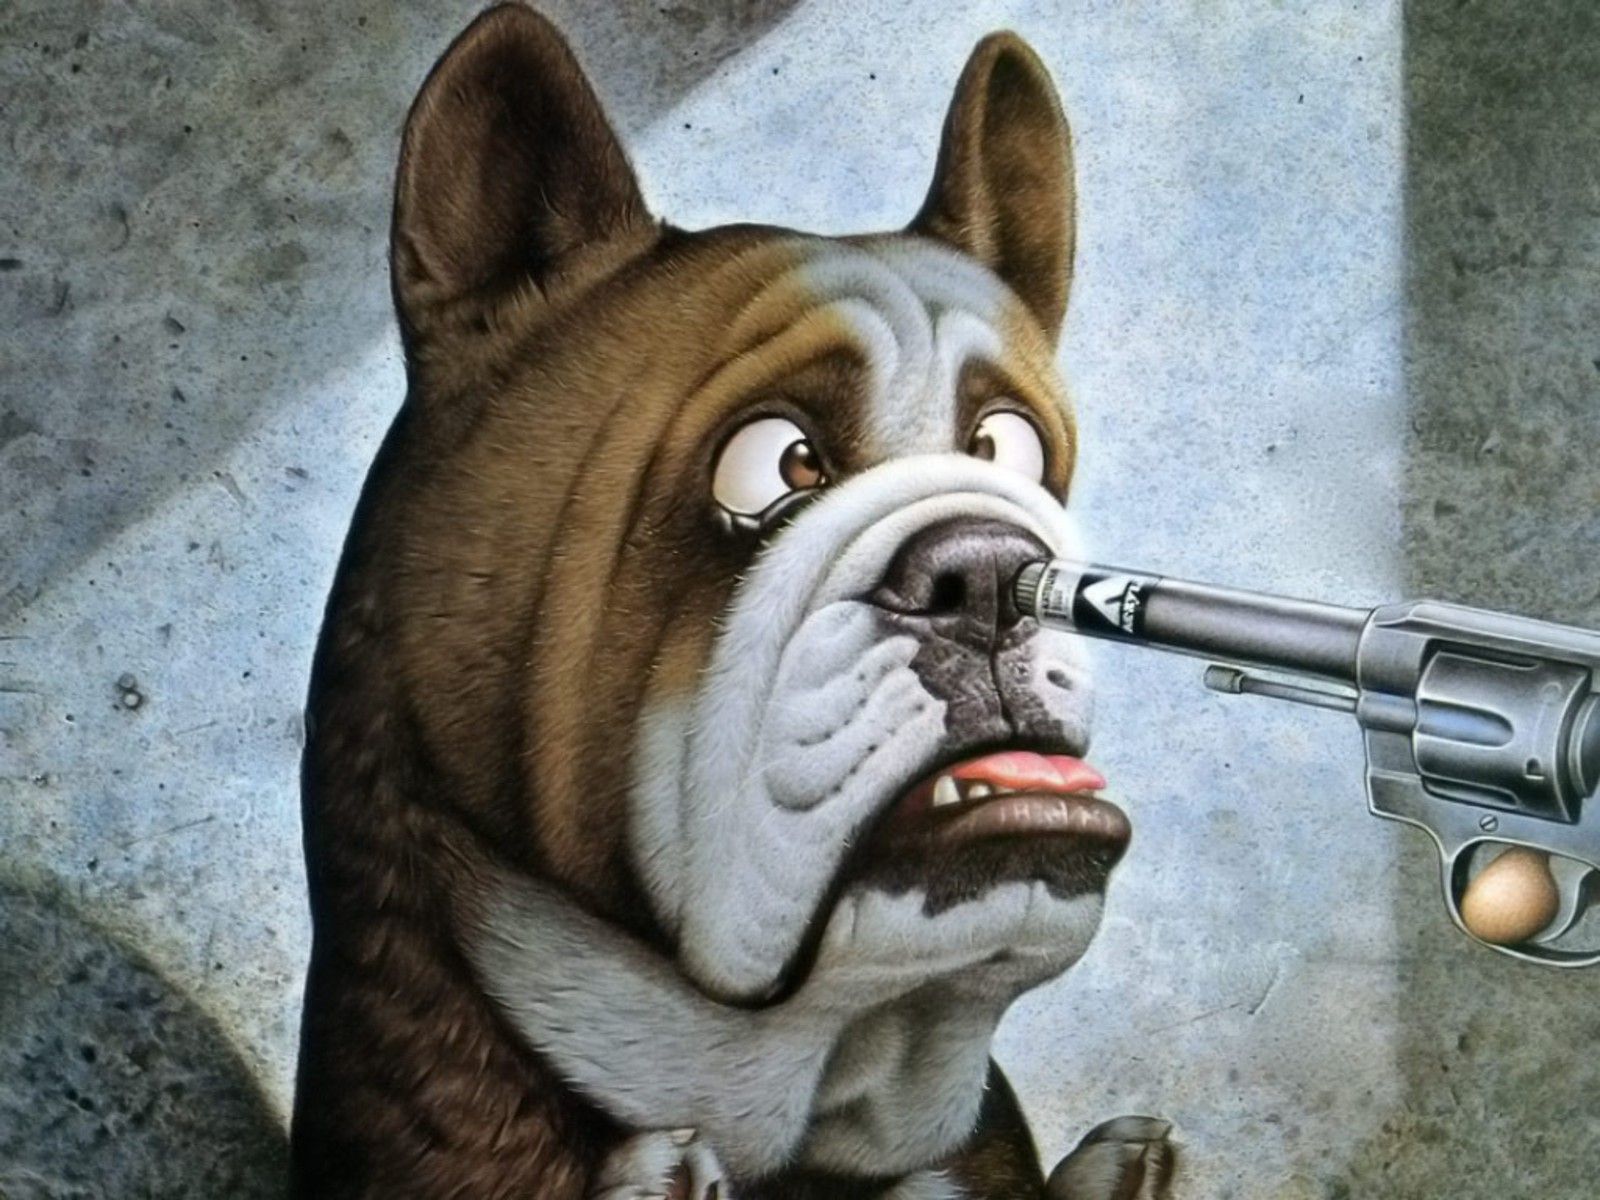 Funny Animation Wallpaper. Drawing Inspiration. Funny dog picture, Animal humor dog, Funny dog faces